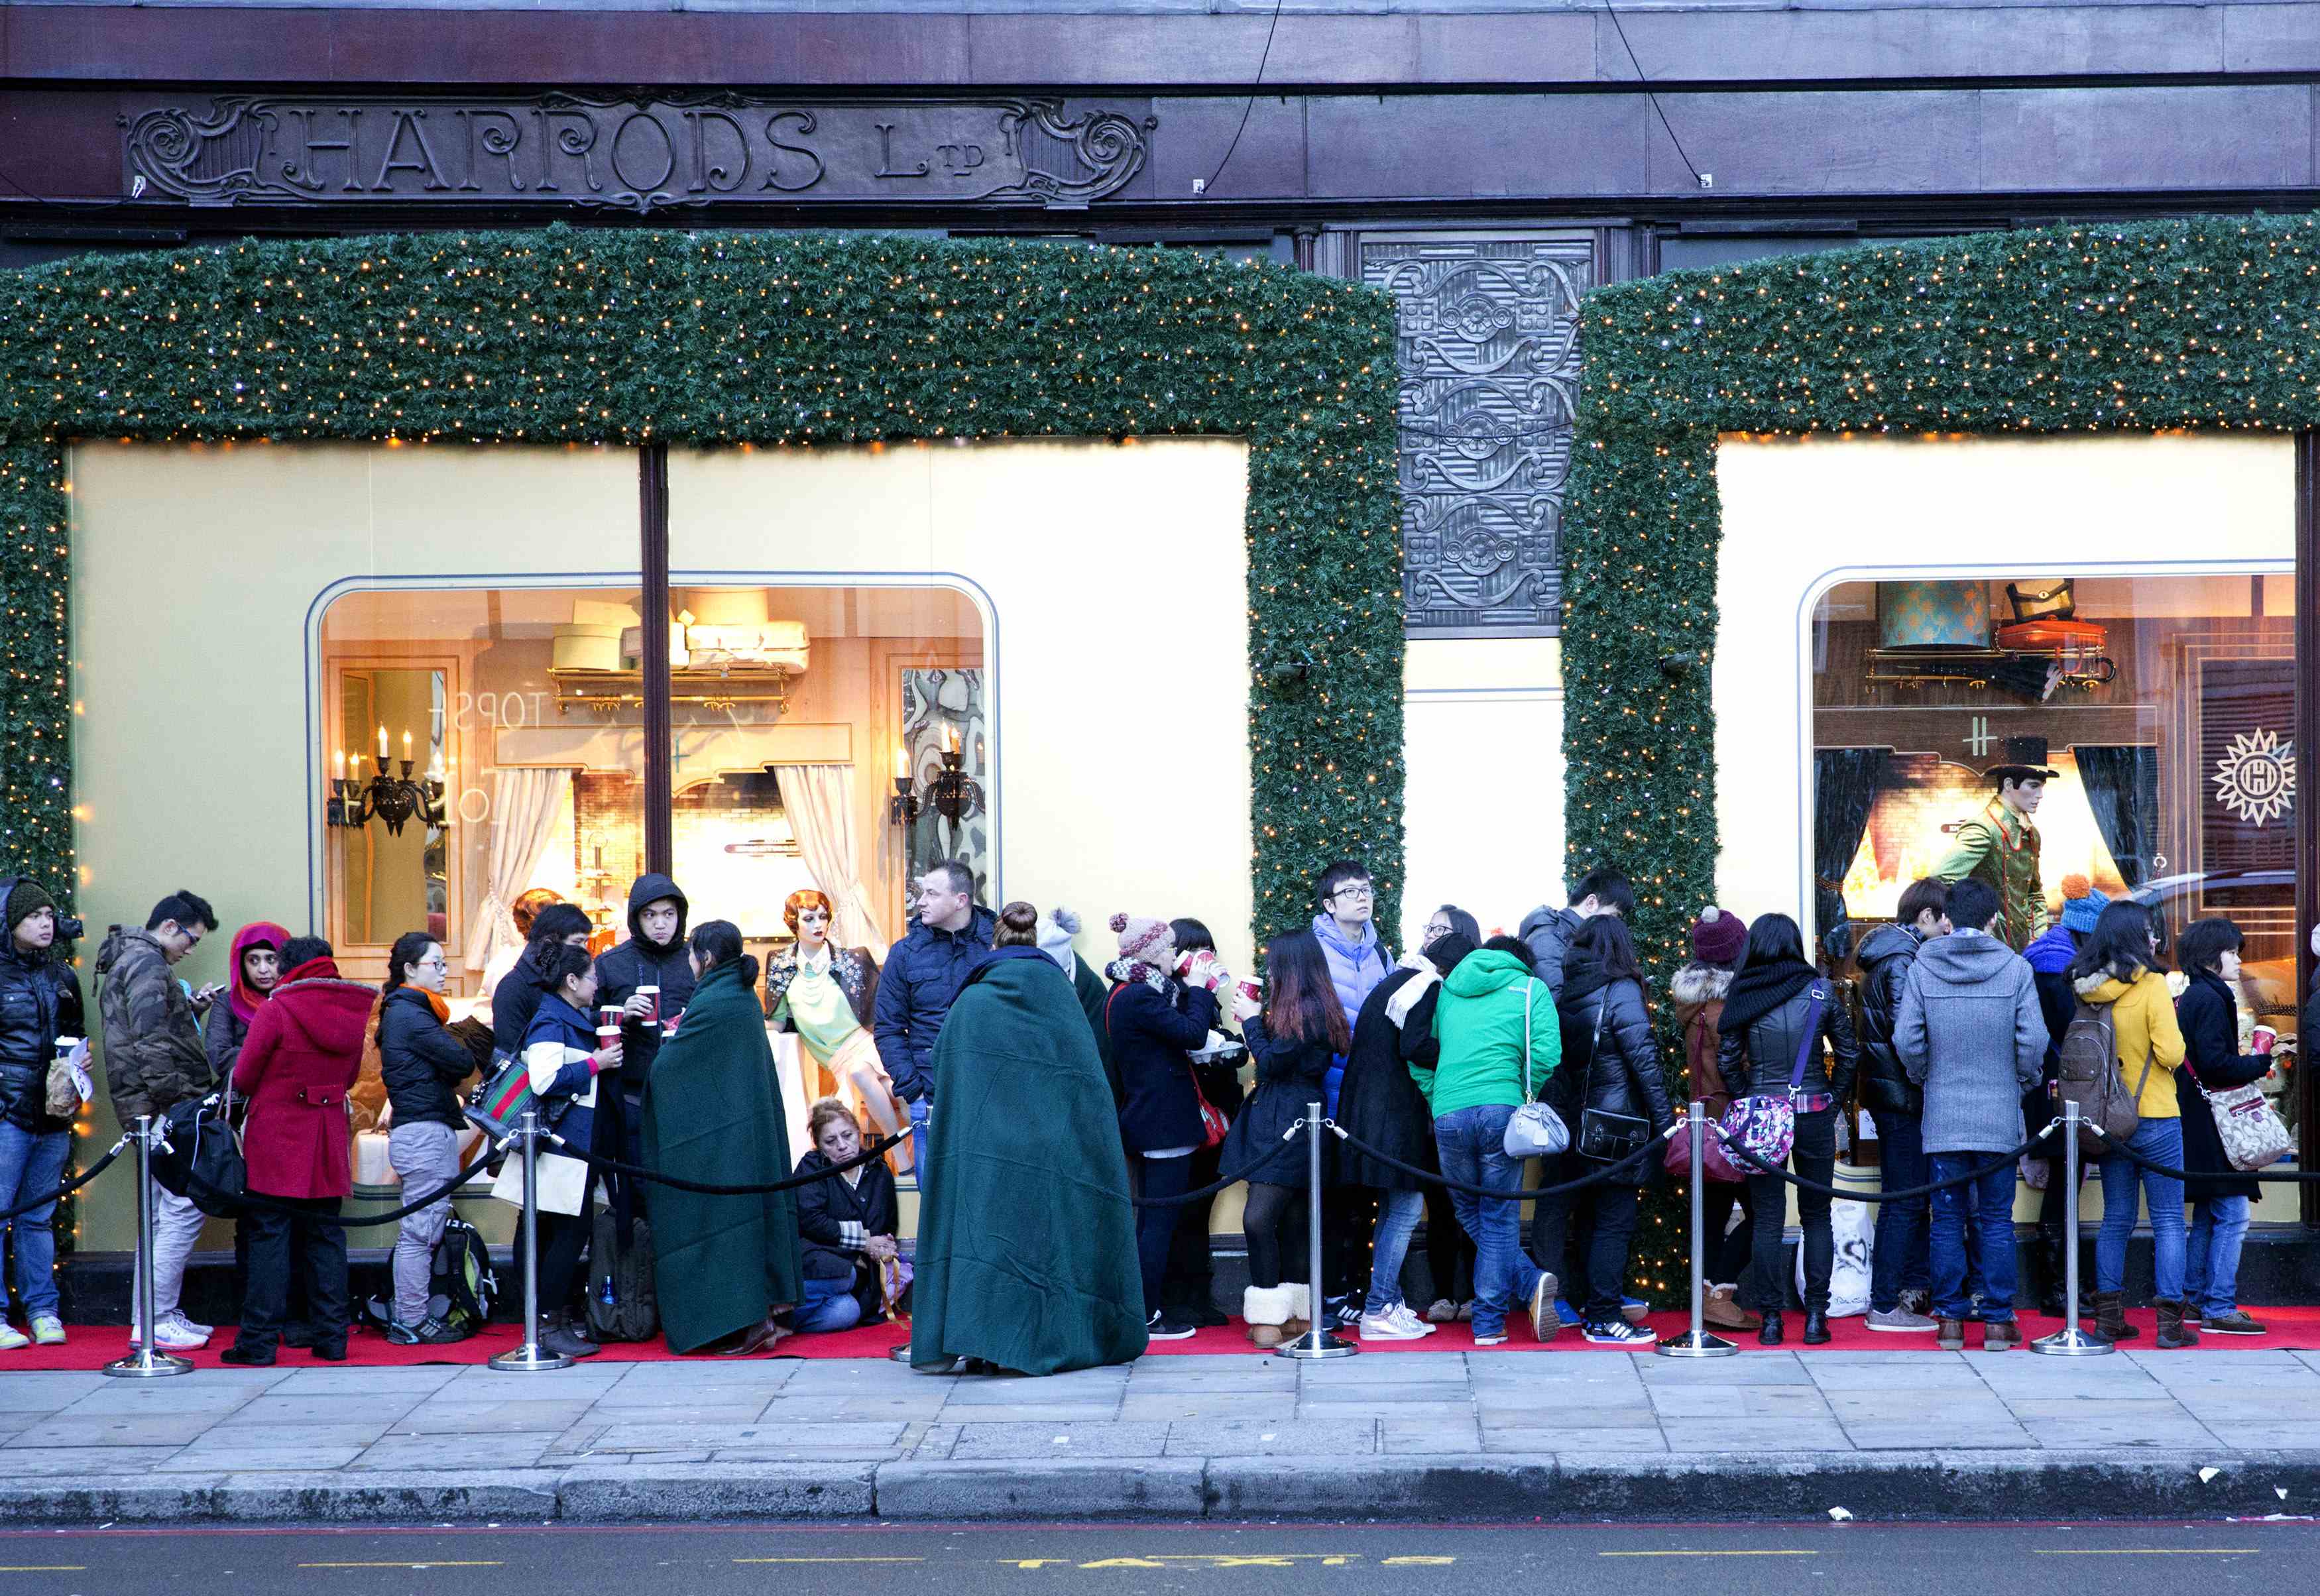 After early Boxing Day rush, UK shopper numbers flat on last year